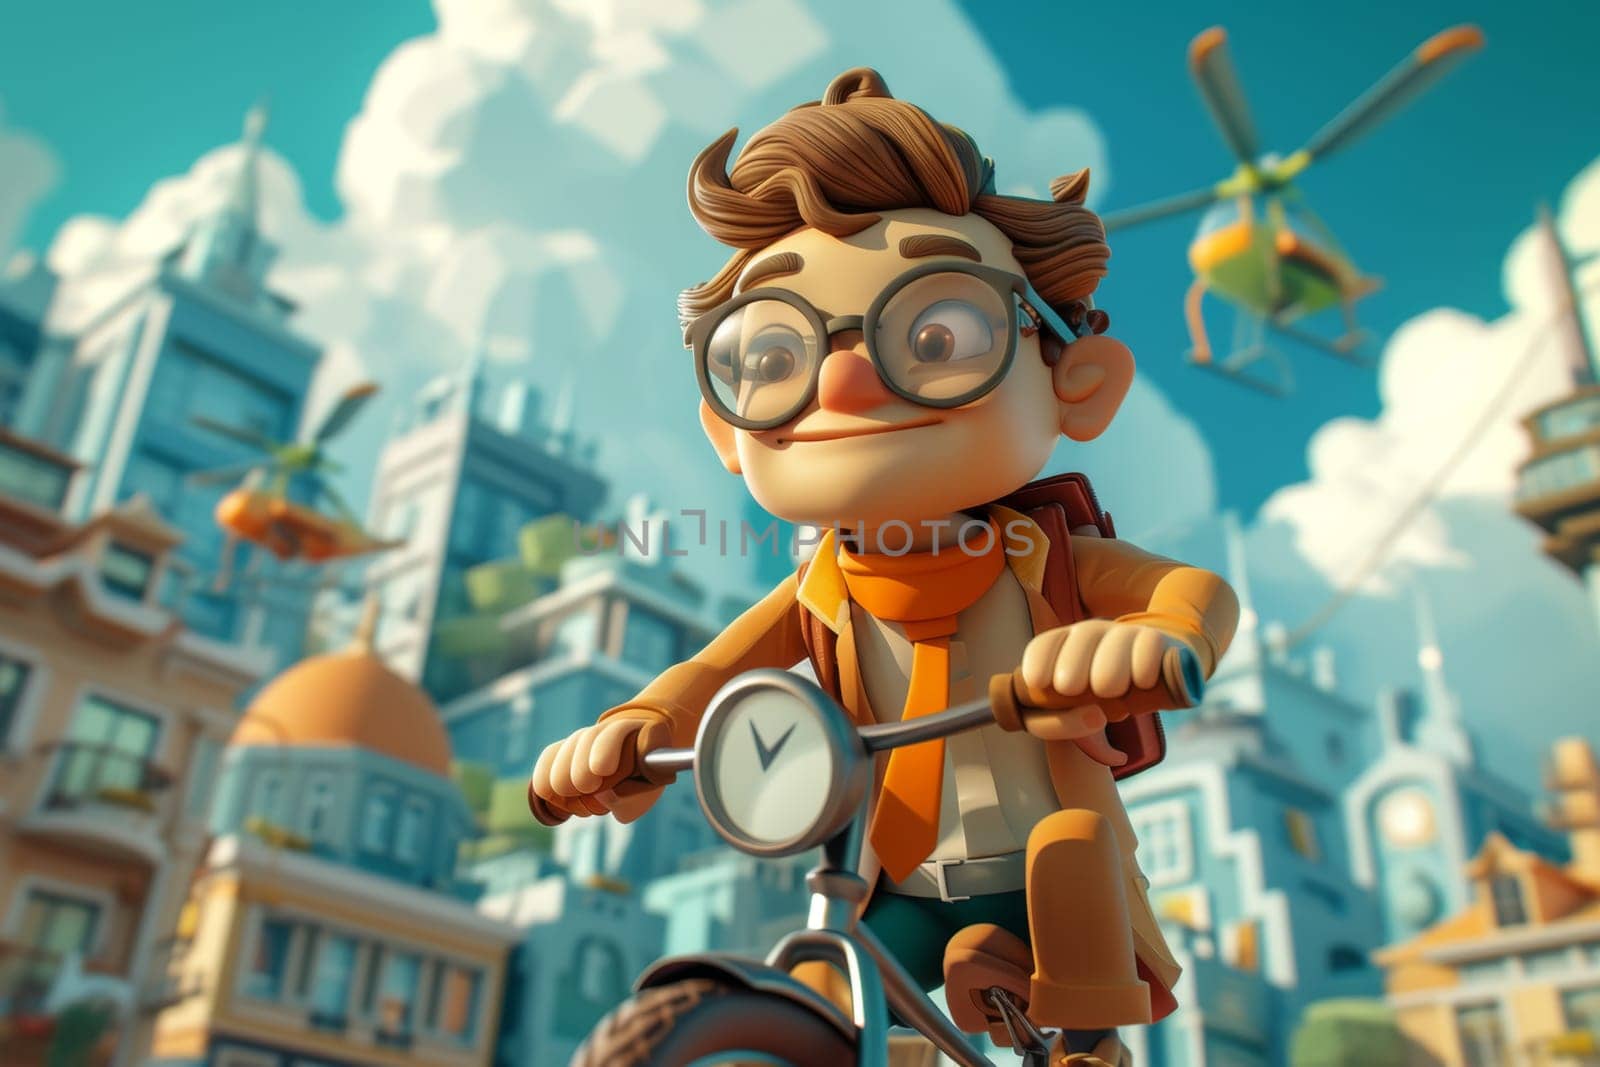 The cartoon character is a teenager riding a bike down the street . 3d illustration.